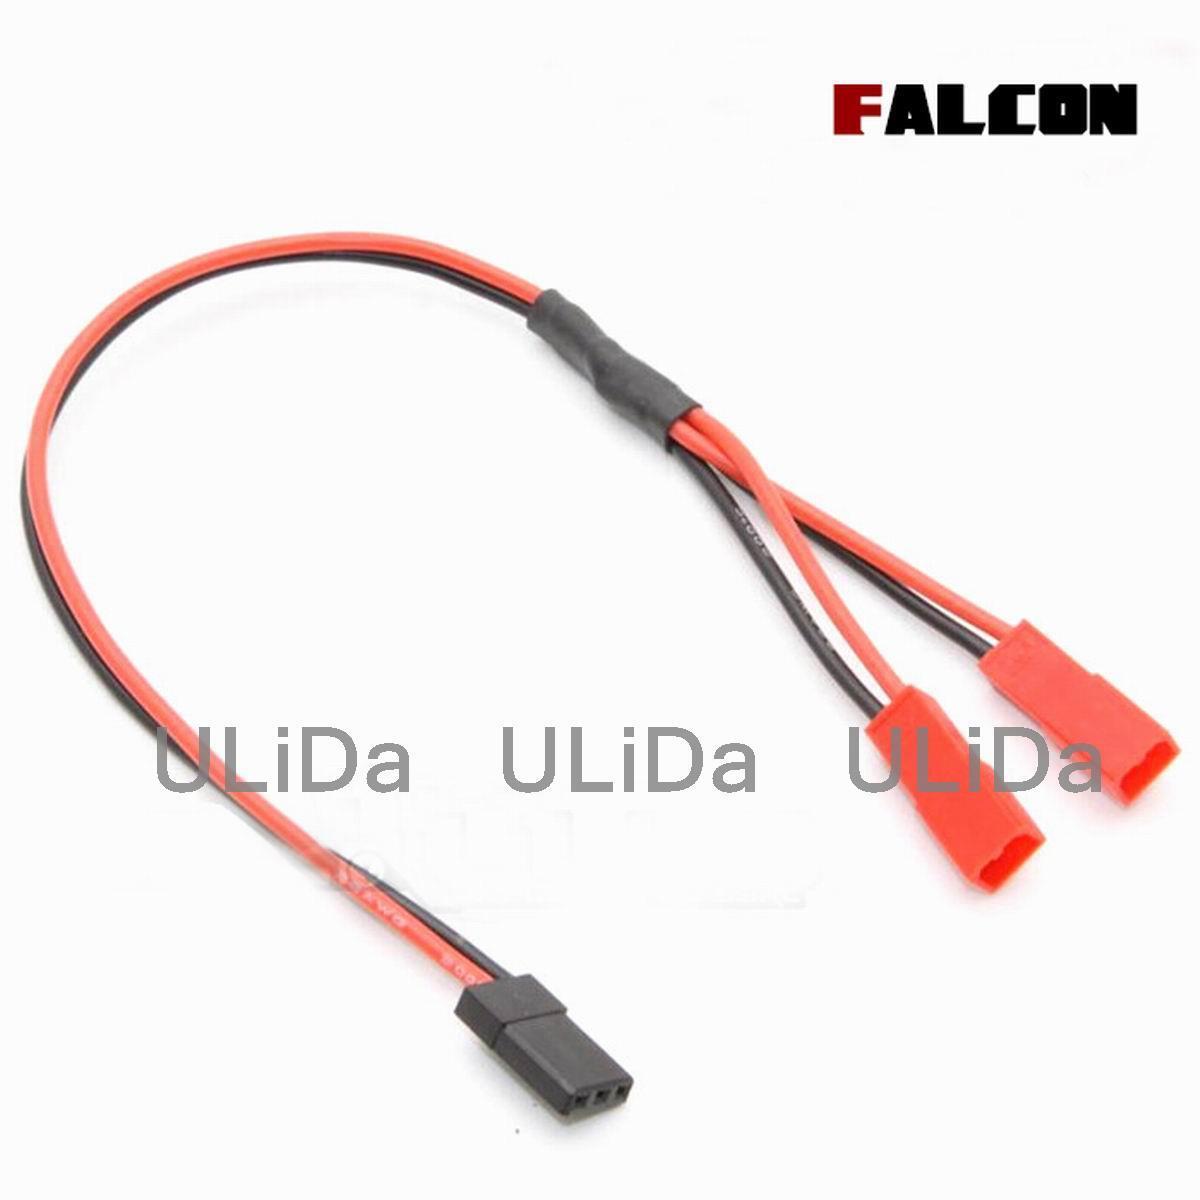 JST Female Plug to JR Male Connector Battery Conversion Cable RC Model Car